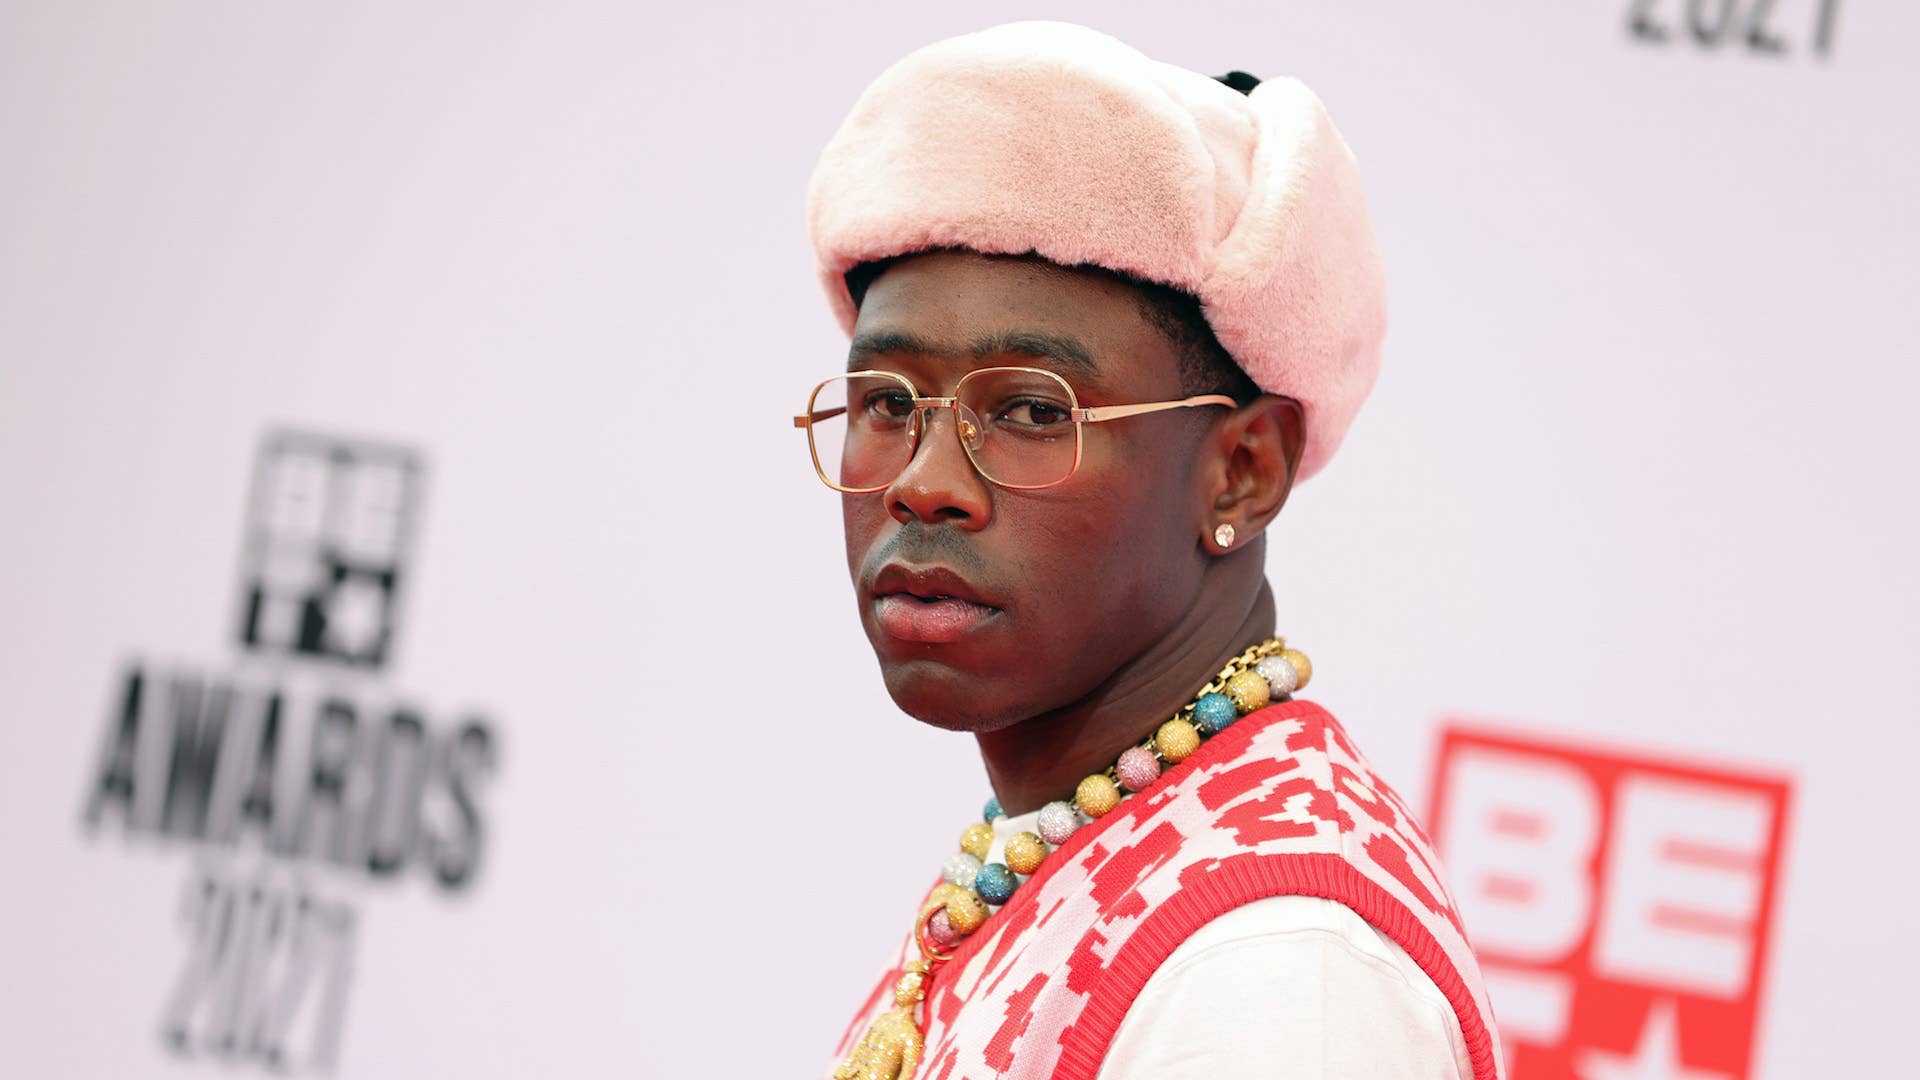 Tyler The Creator Wallpaper Discover more American, Professional